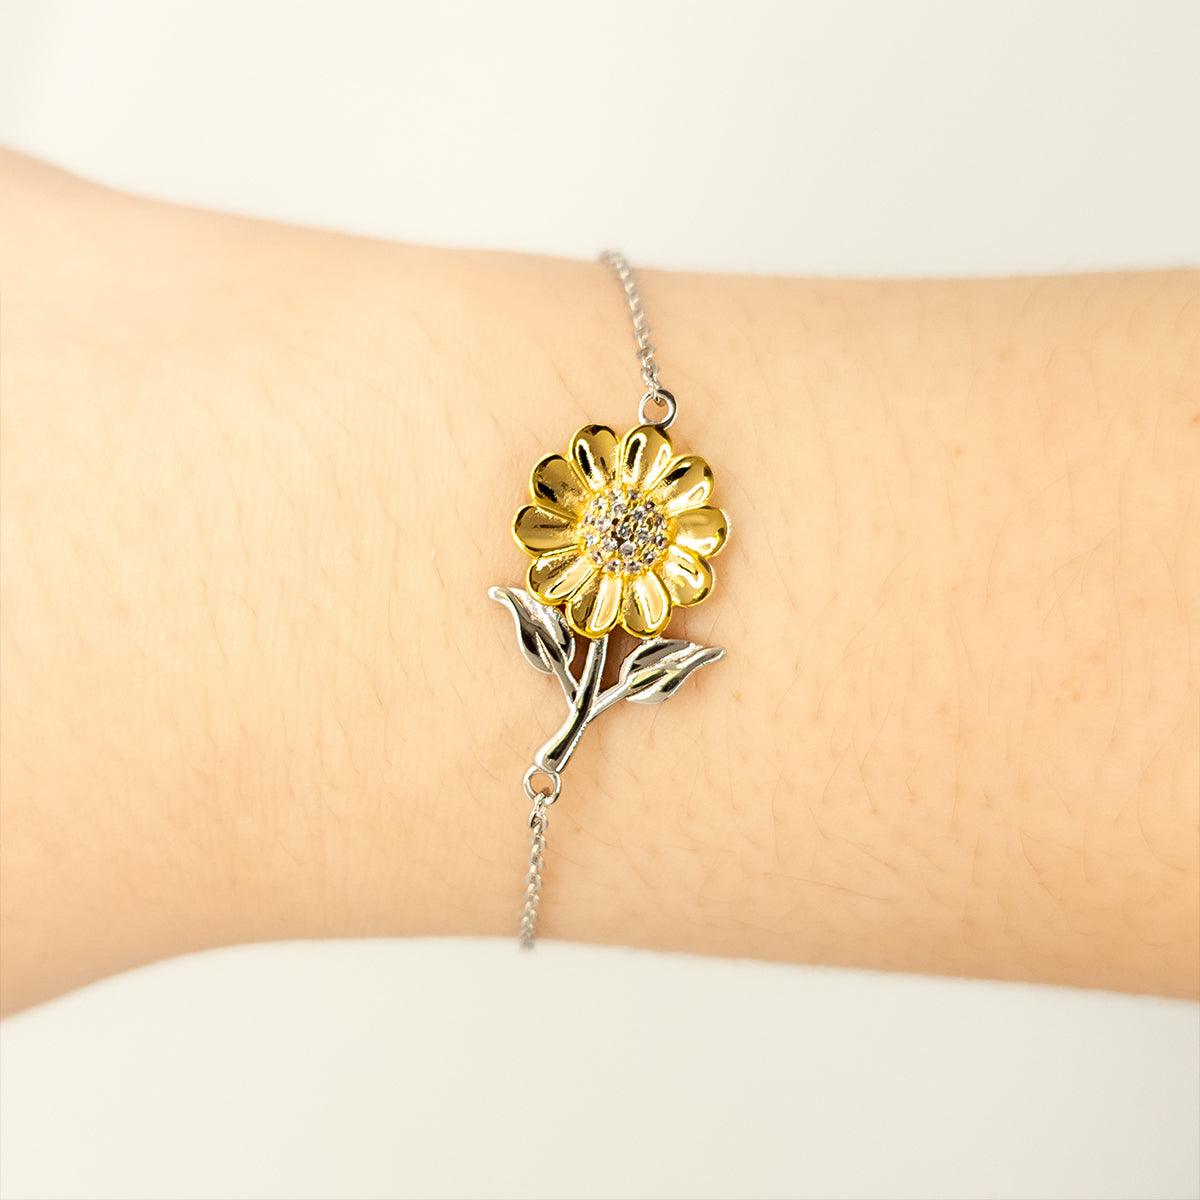 Sunflower Bracelet for Son Present, Son Always follow your dreams, never forget how amazing you are, Son Birthday Christmas Gifts Jewelry for Girls Boys Teen Men Women - Mallard Moon Gift Shop